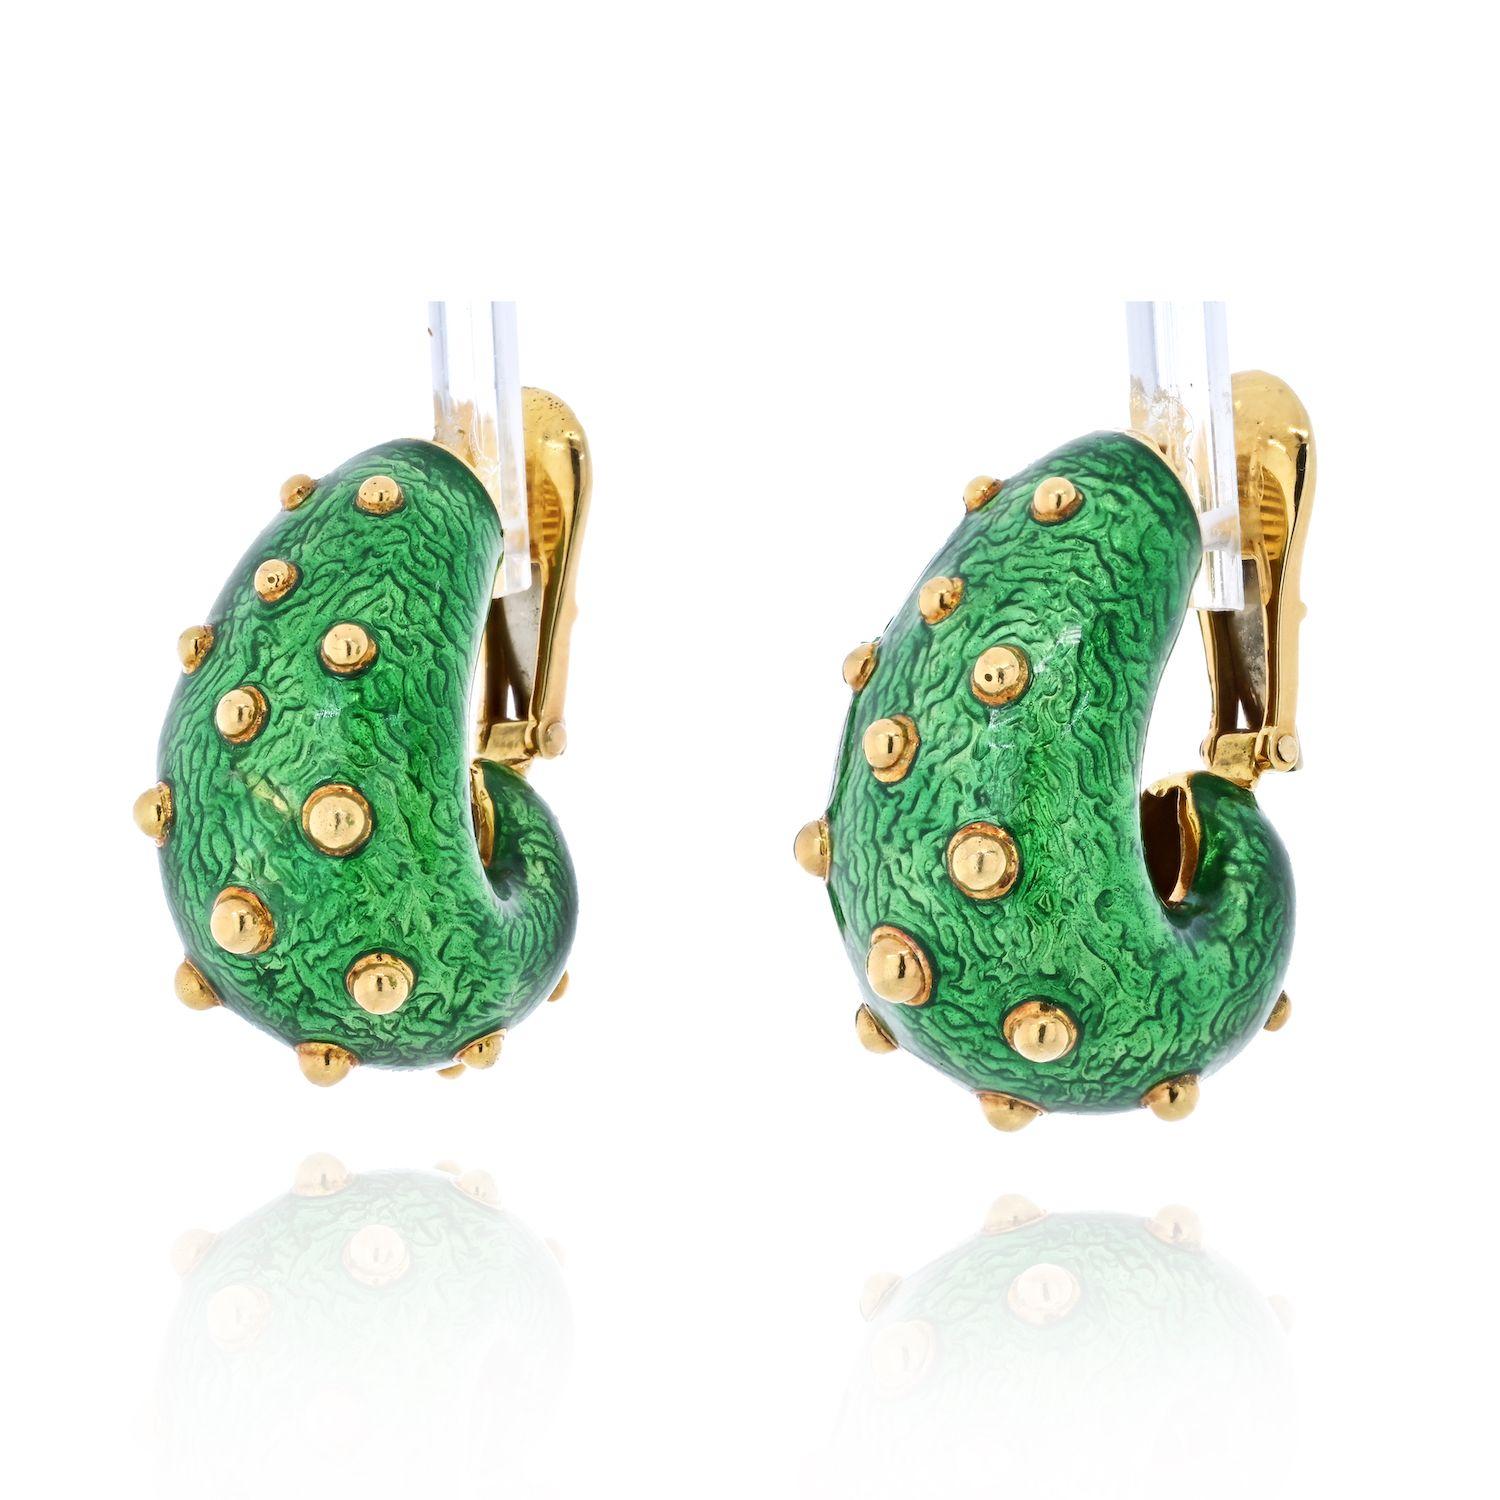 Excellent earrings who is in love with David Webb, enameling and color green. These are fun every day earrings that were handpainted with green enamel, applied with gold round beads on the surface, and secured with clip closure. 
These earrings